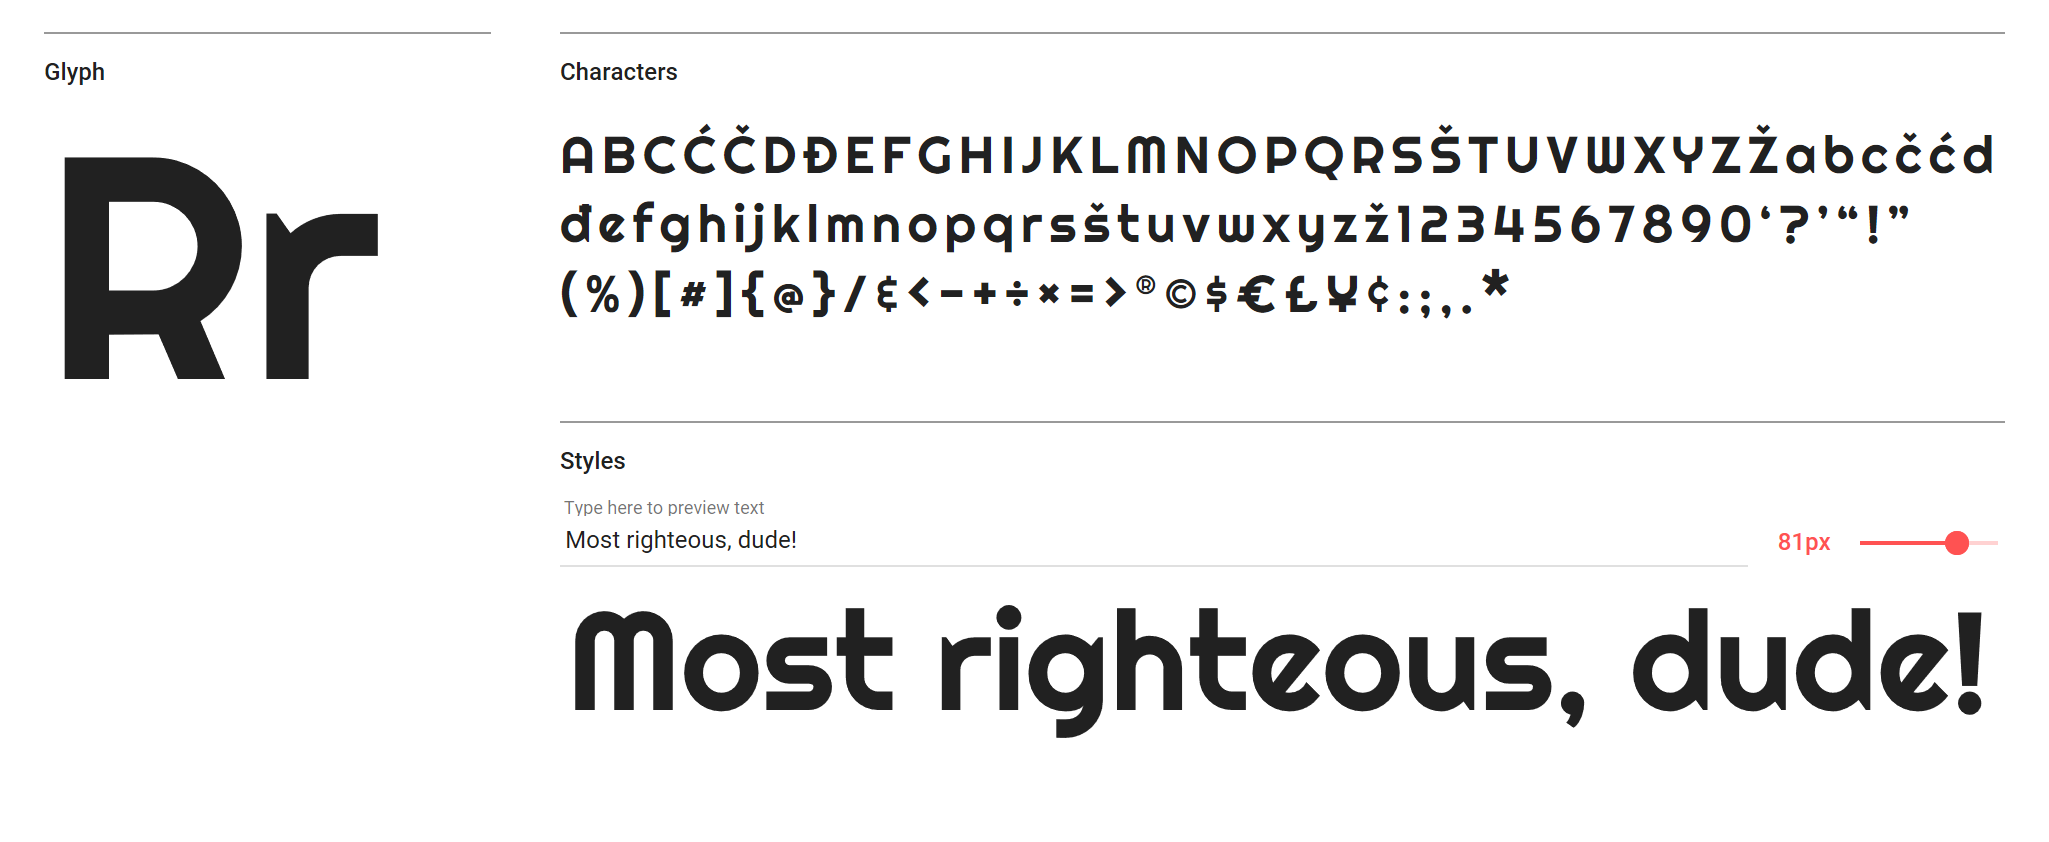 are google fonts free to use